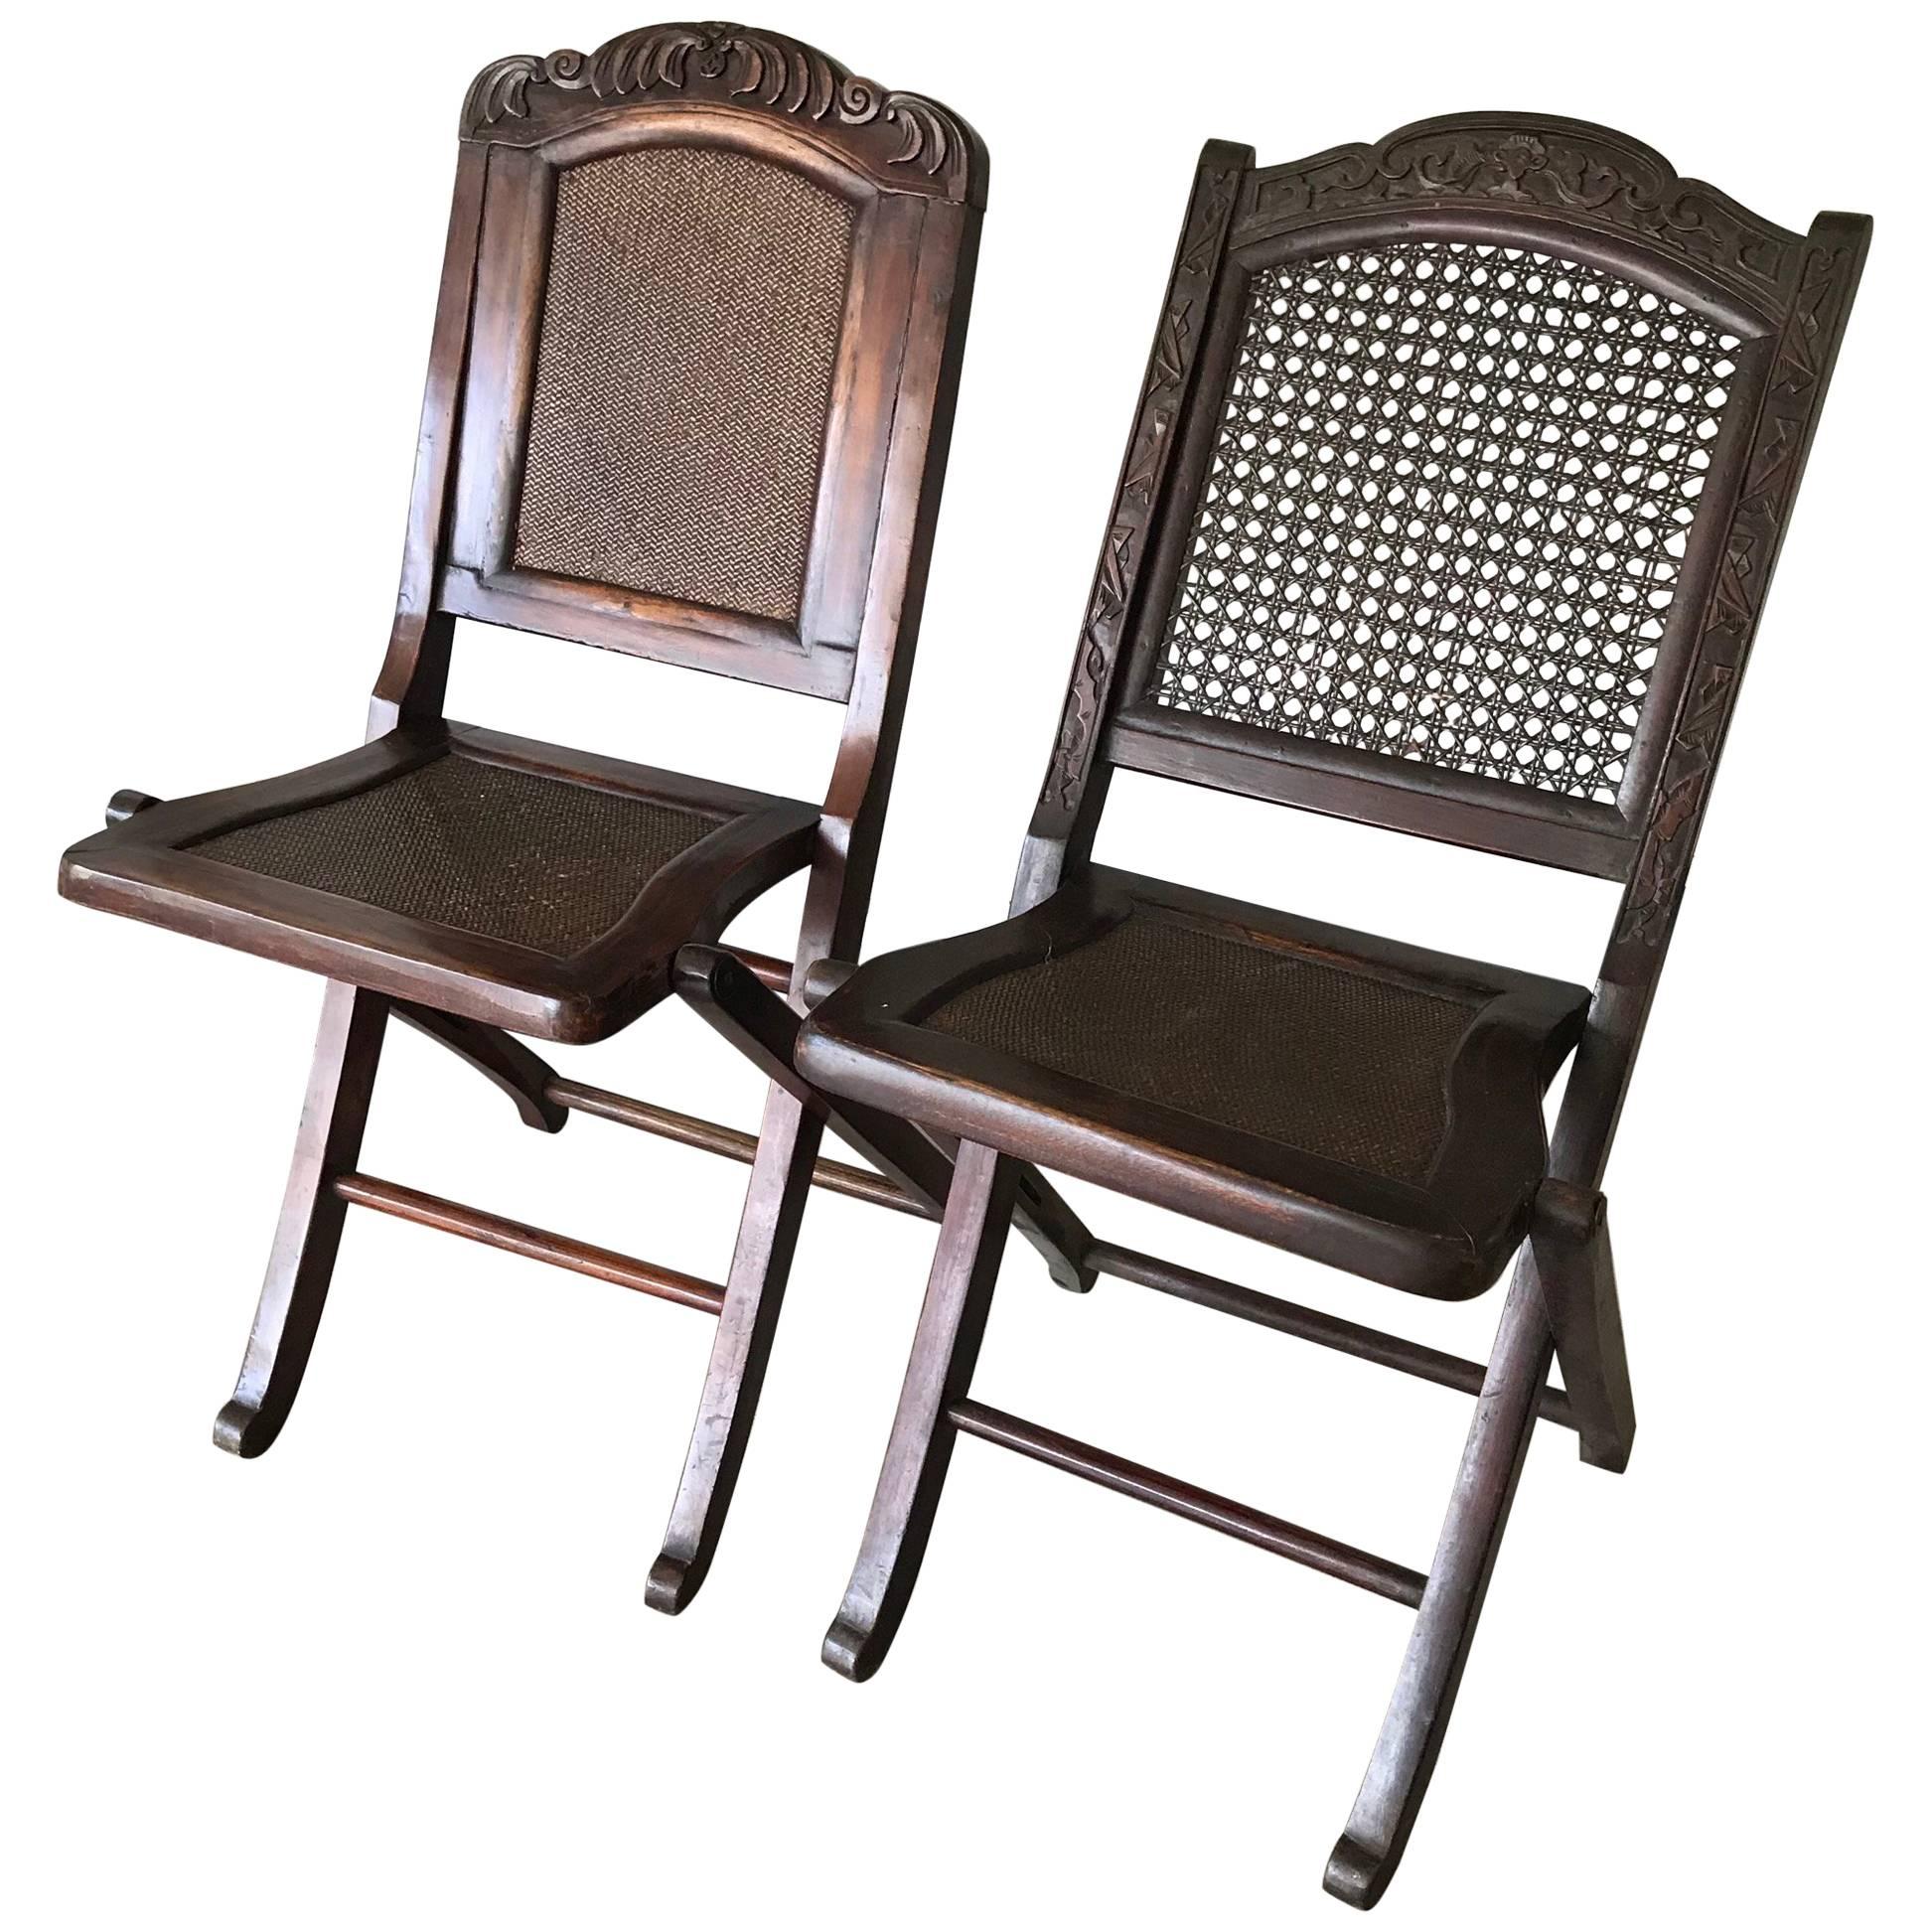 Antique Near Pair of Handcrafted, Chinese Folding Traveller’s Chairs W. Webbing